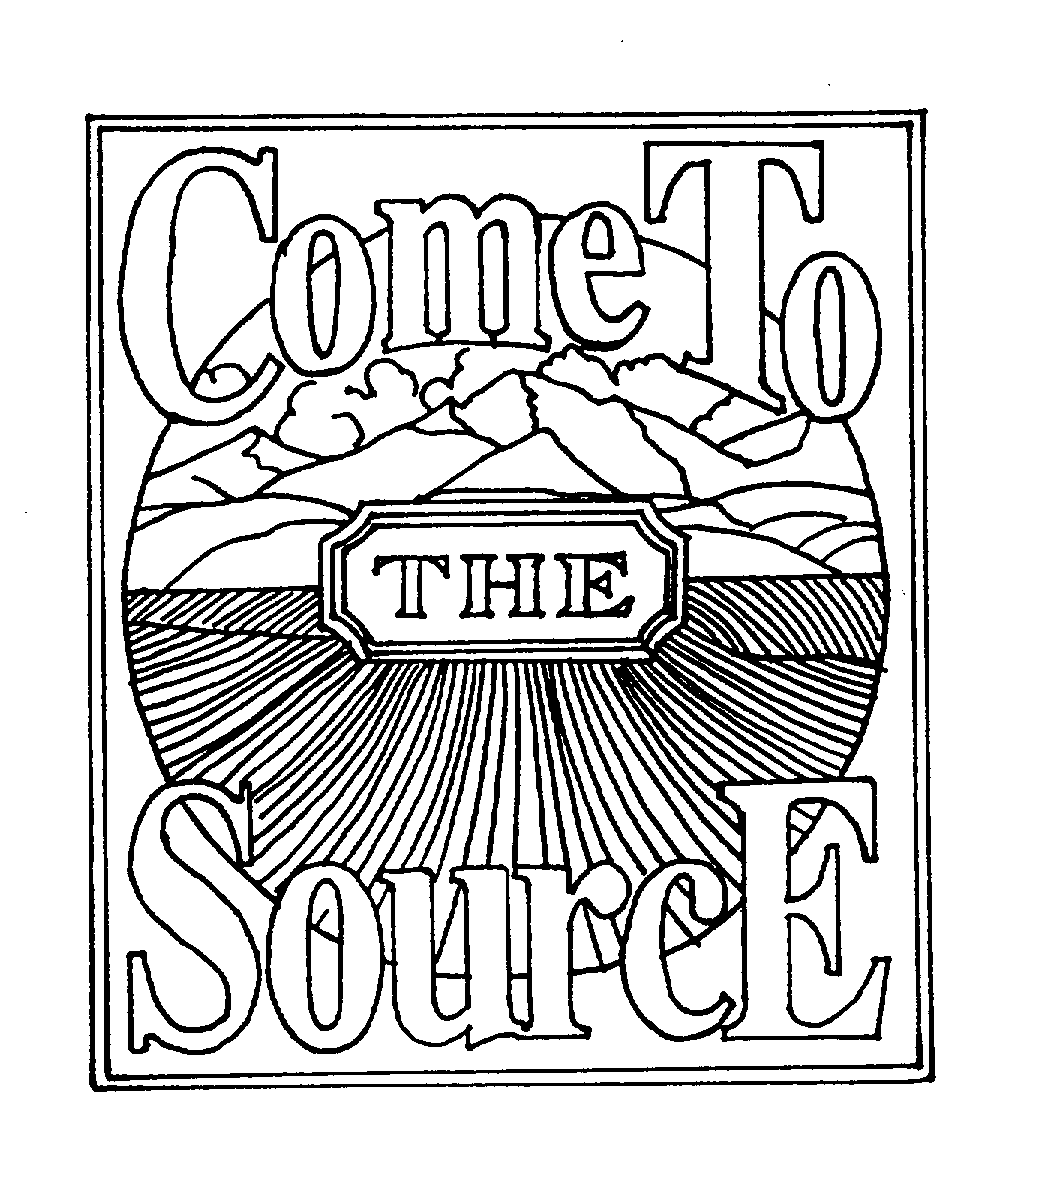  COME TO THE SOURCE